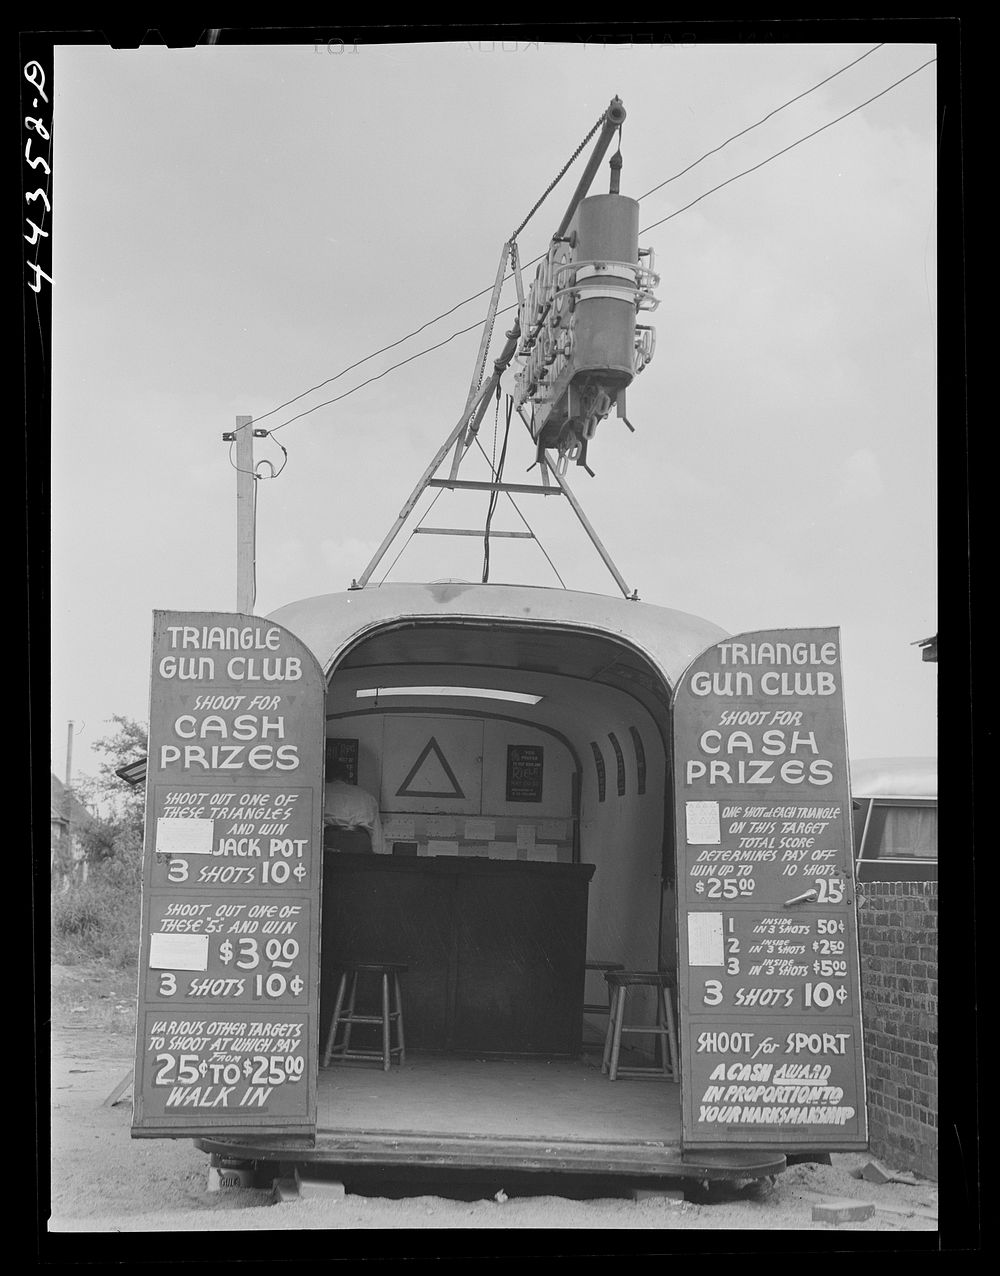 Trailer shooting gallery on the main street of Childersburg, Alabama. Sourced from the Library of Congress.